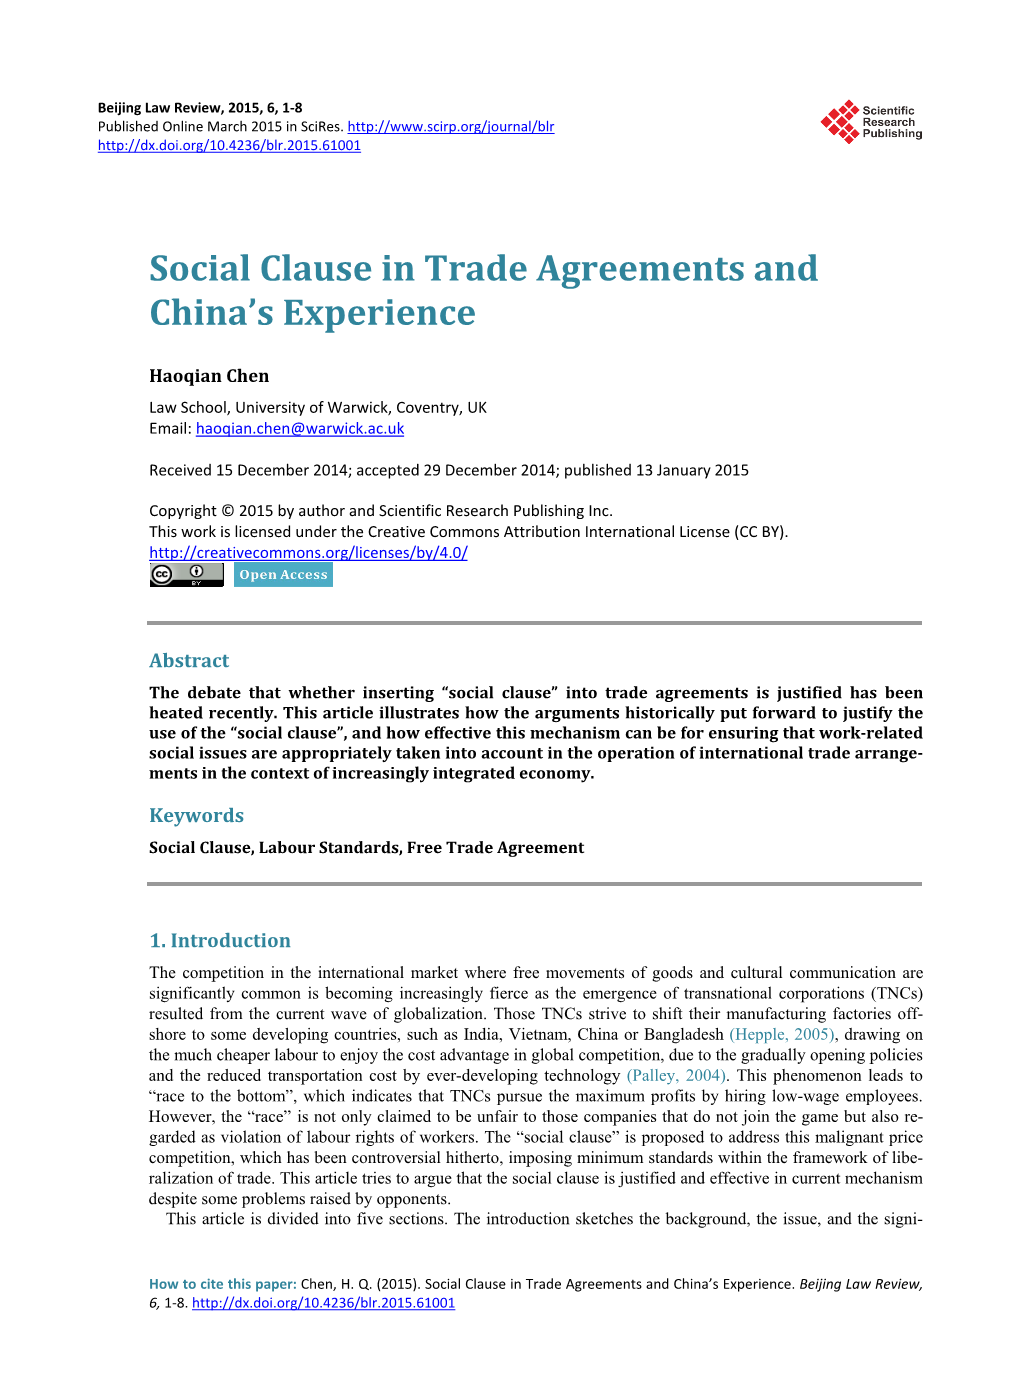 Social Clause in Trade Agreements and China's Experience